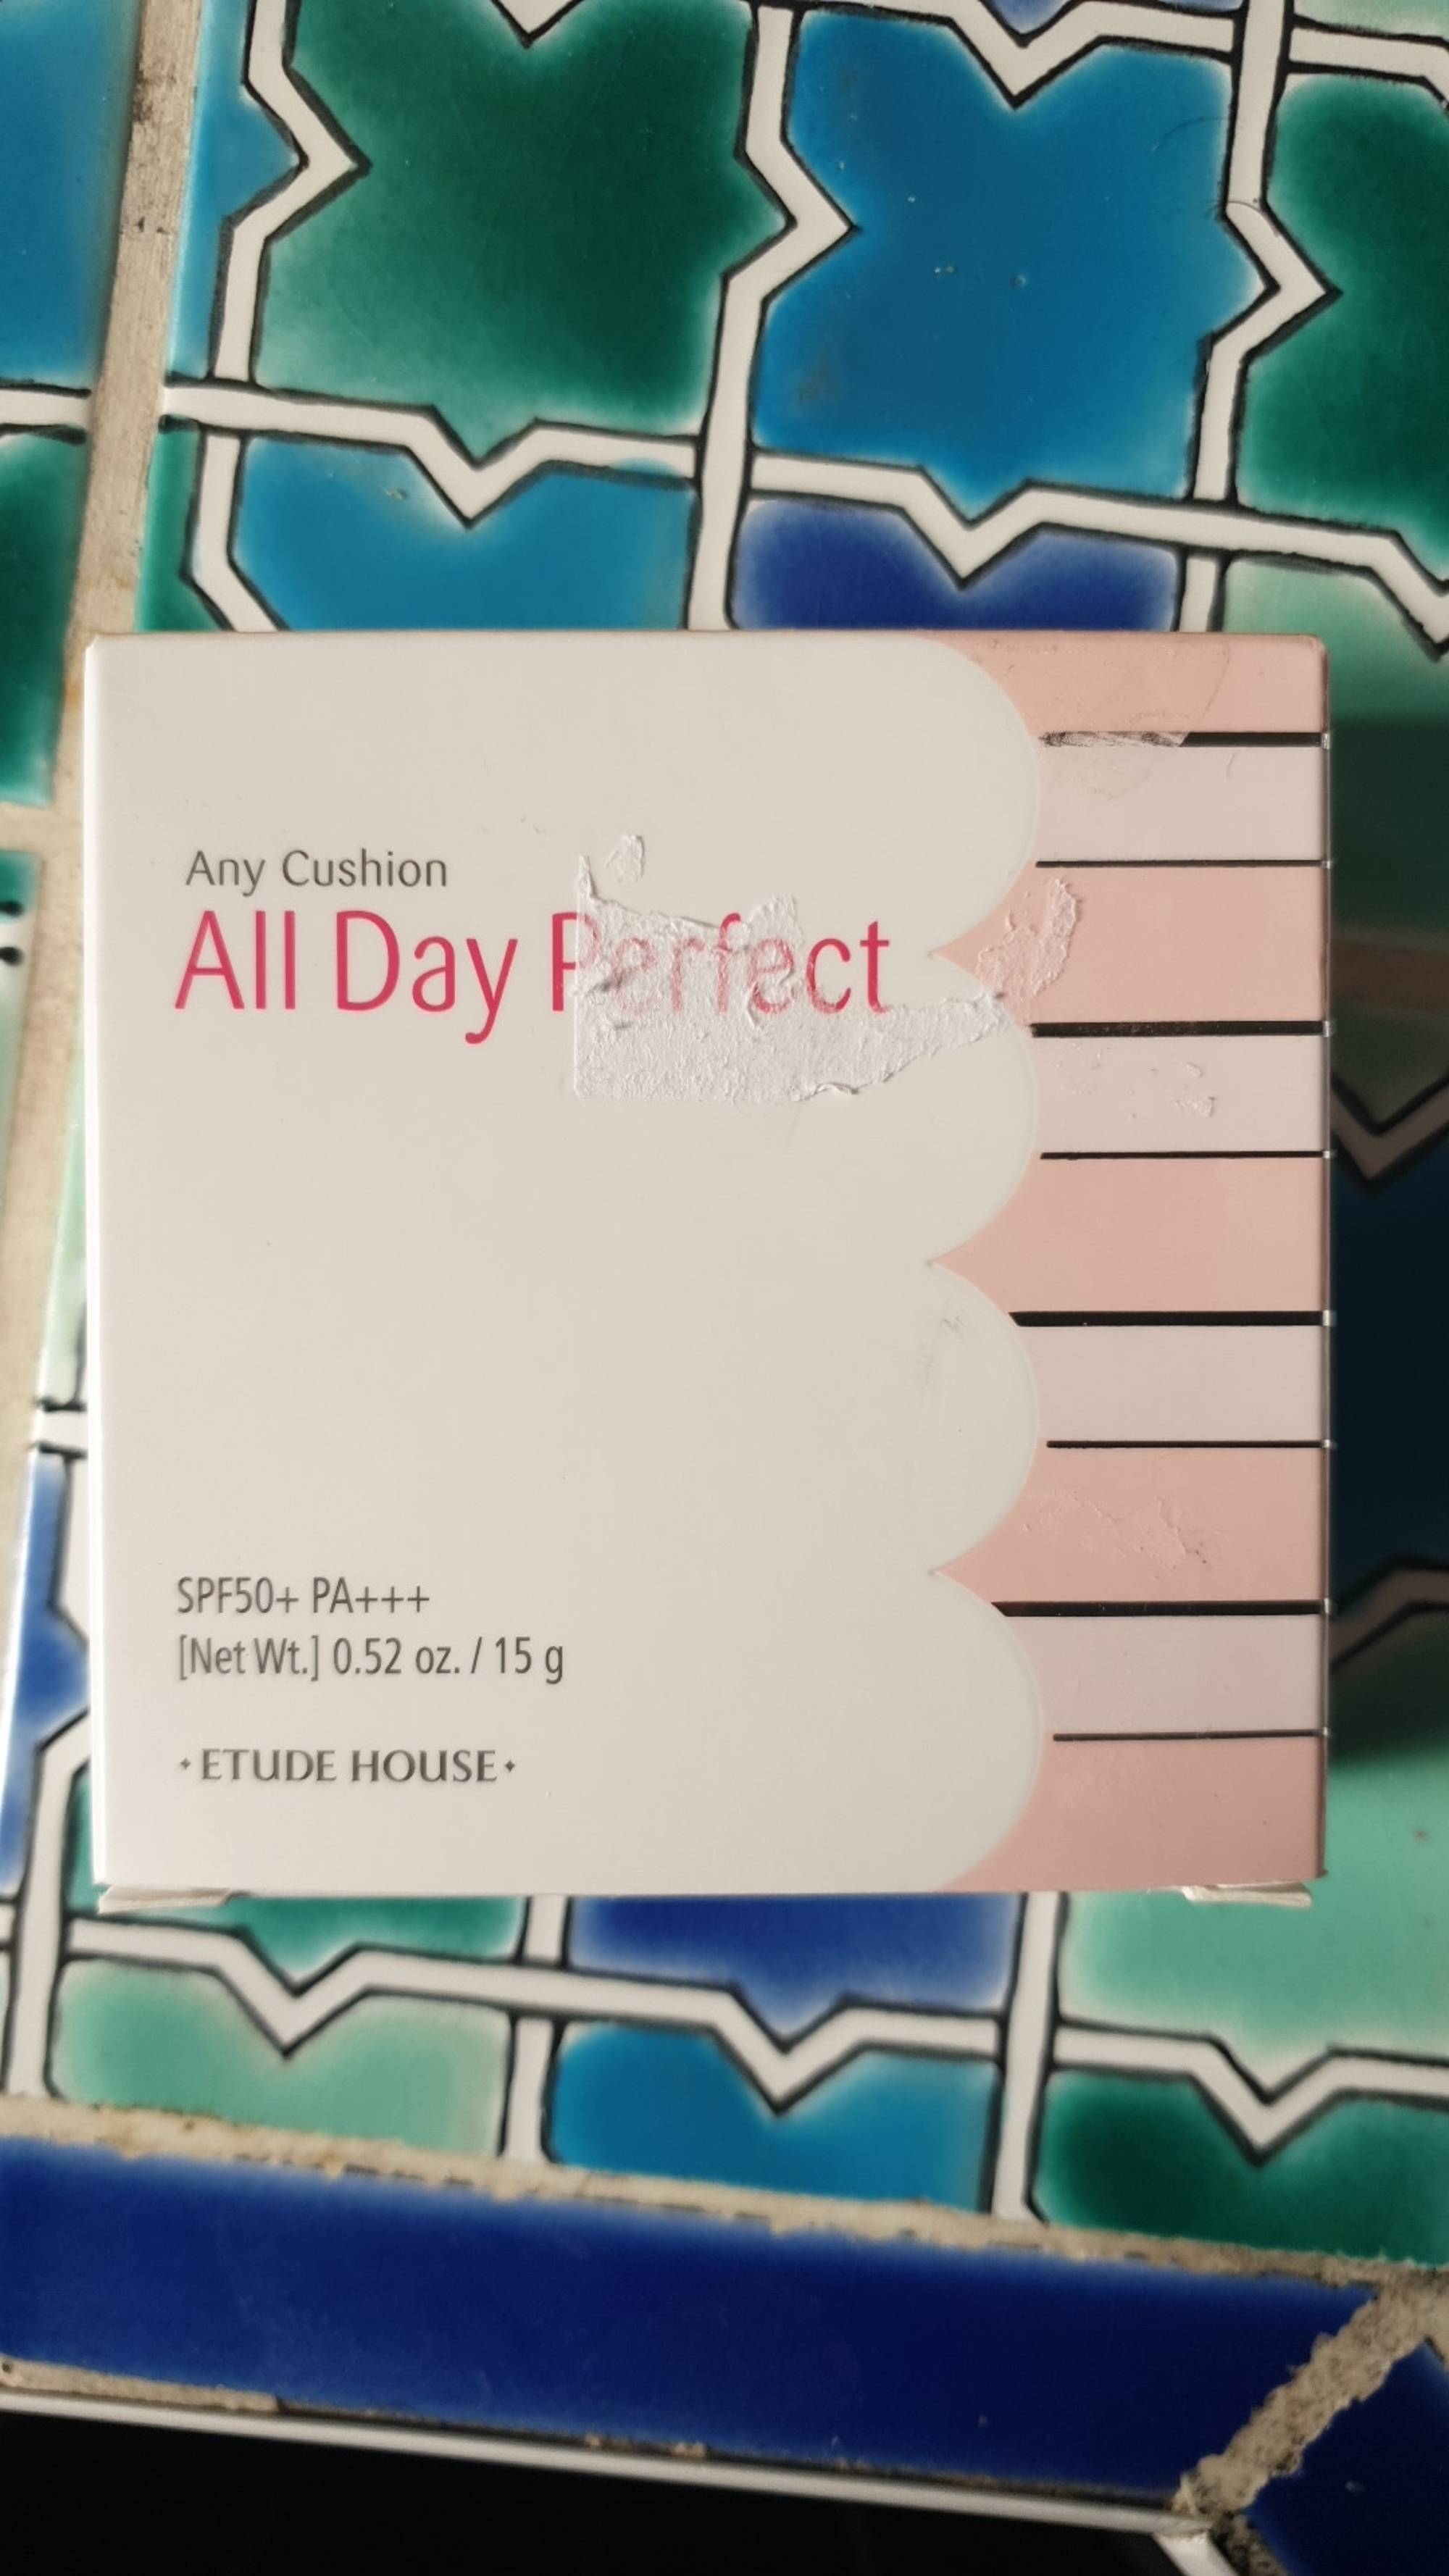 ETUDE HOUSE - Any Cushion - All day perfect SPF 50+ PA+++ Beige 